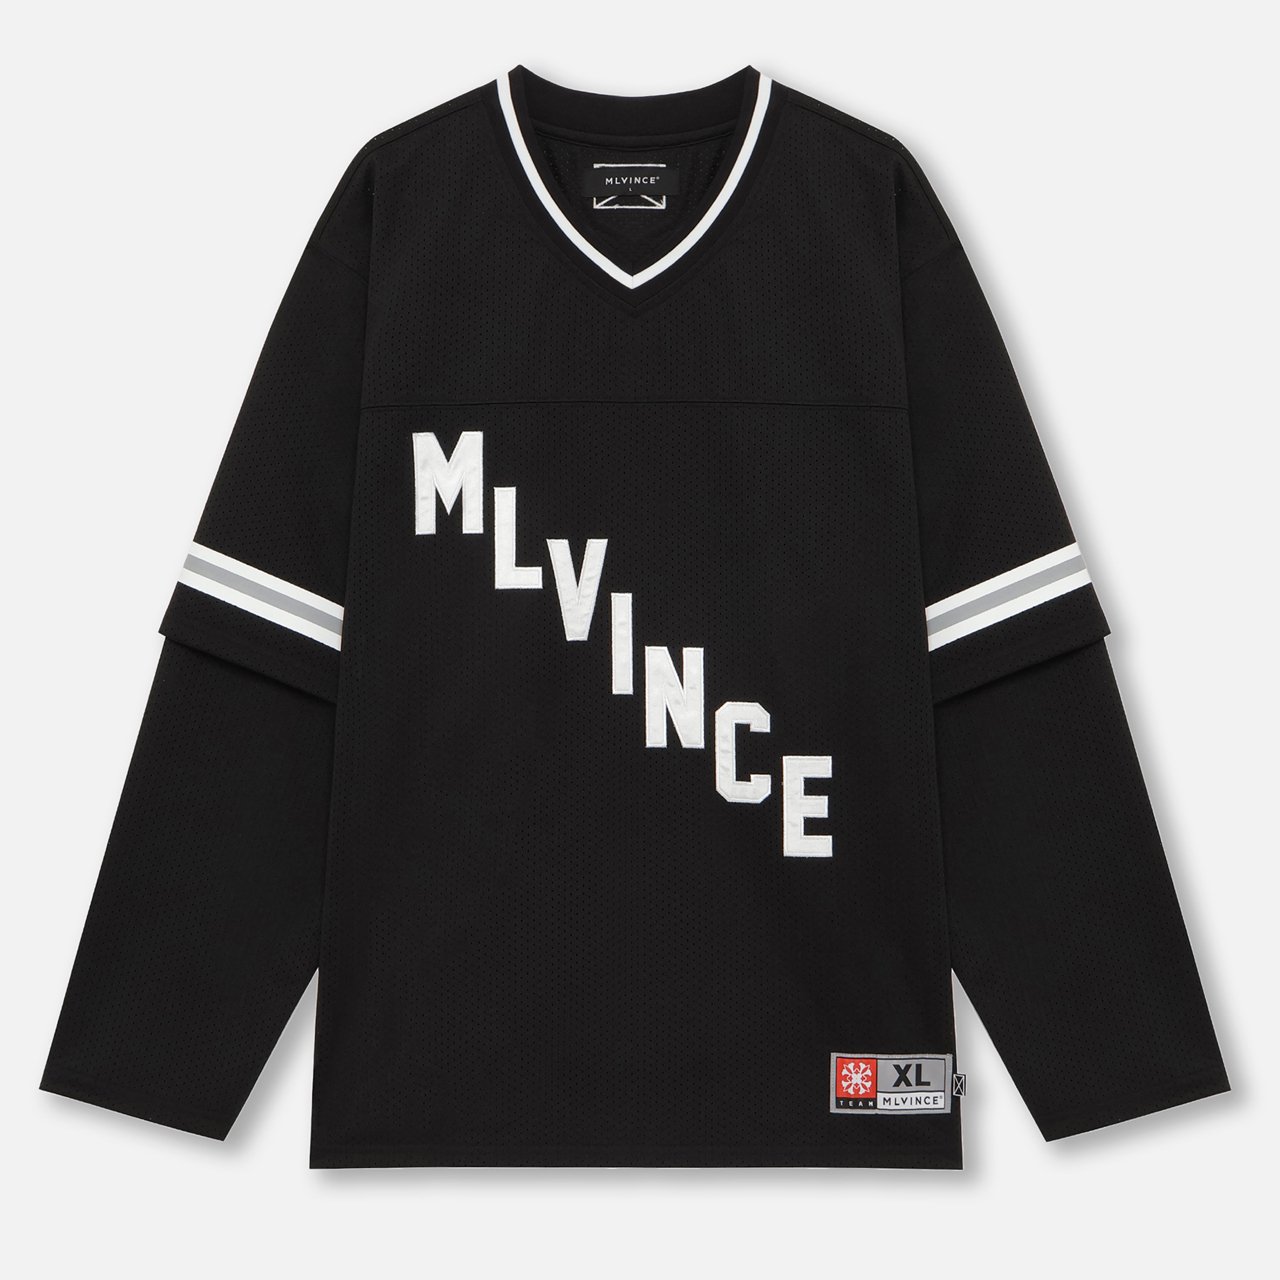 <img class='new_mark_img1' src='https://img.shop-pro.jp/img/new/icons5.gif' style='border:none;display:inline;margin:0px;padding:0px;width:auto;' />MLVINCE () | LAYERED L/S FOOTBALL SHIRT BLACK